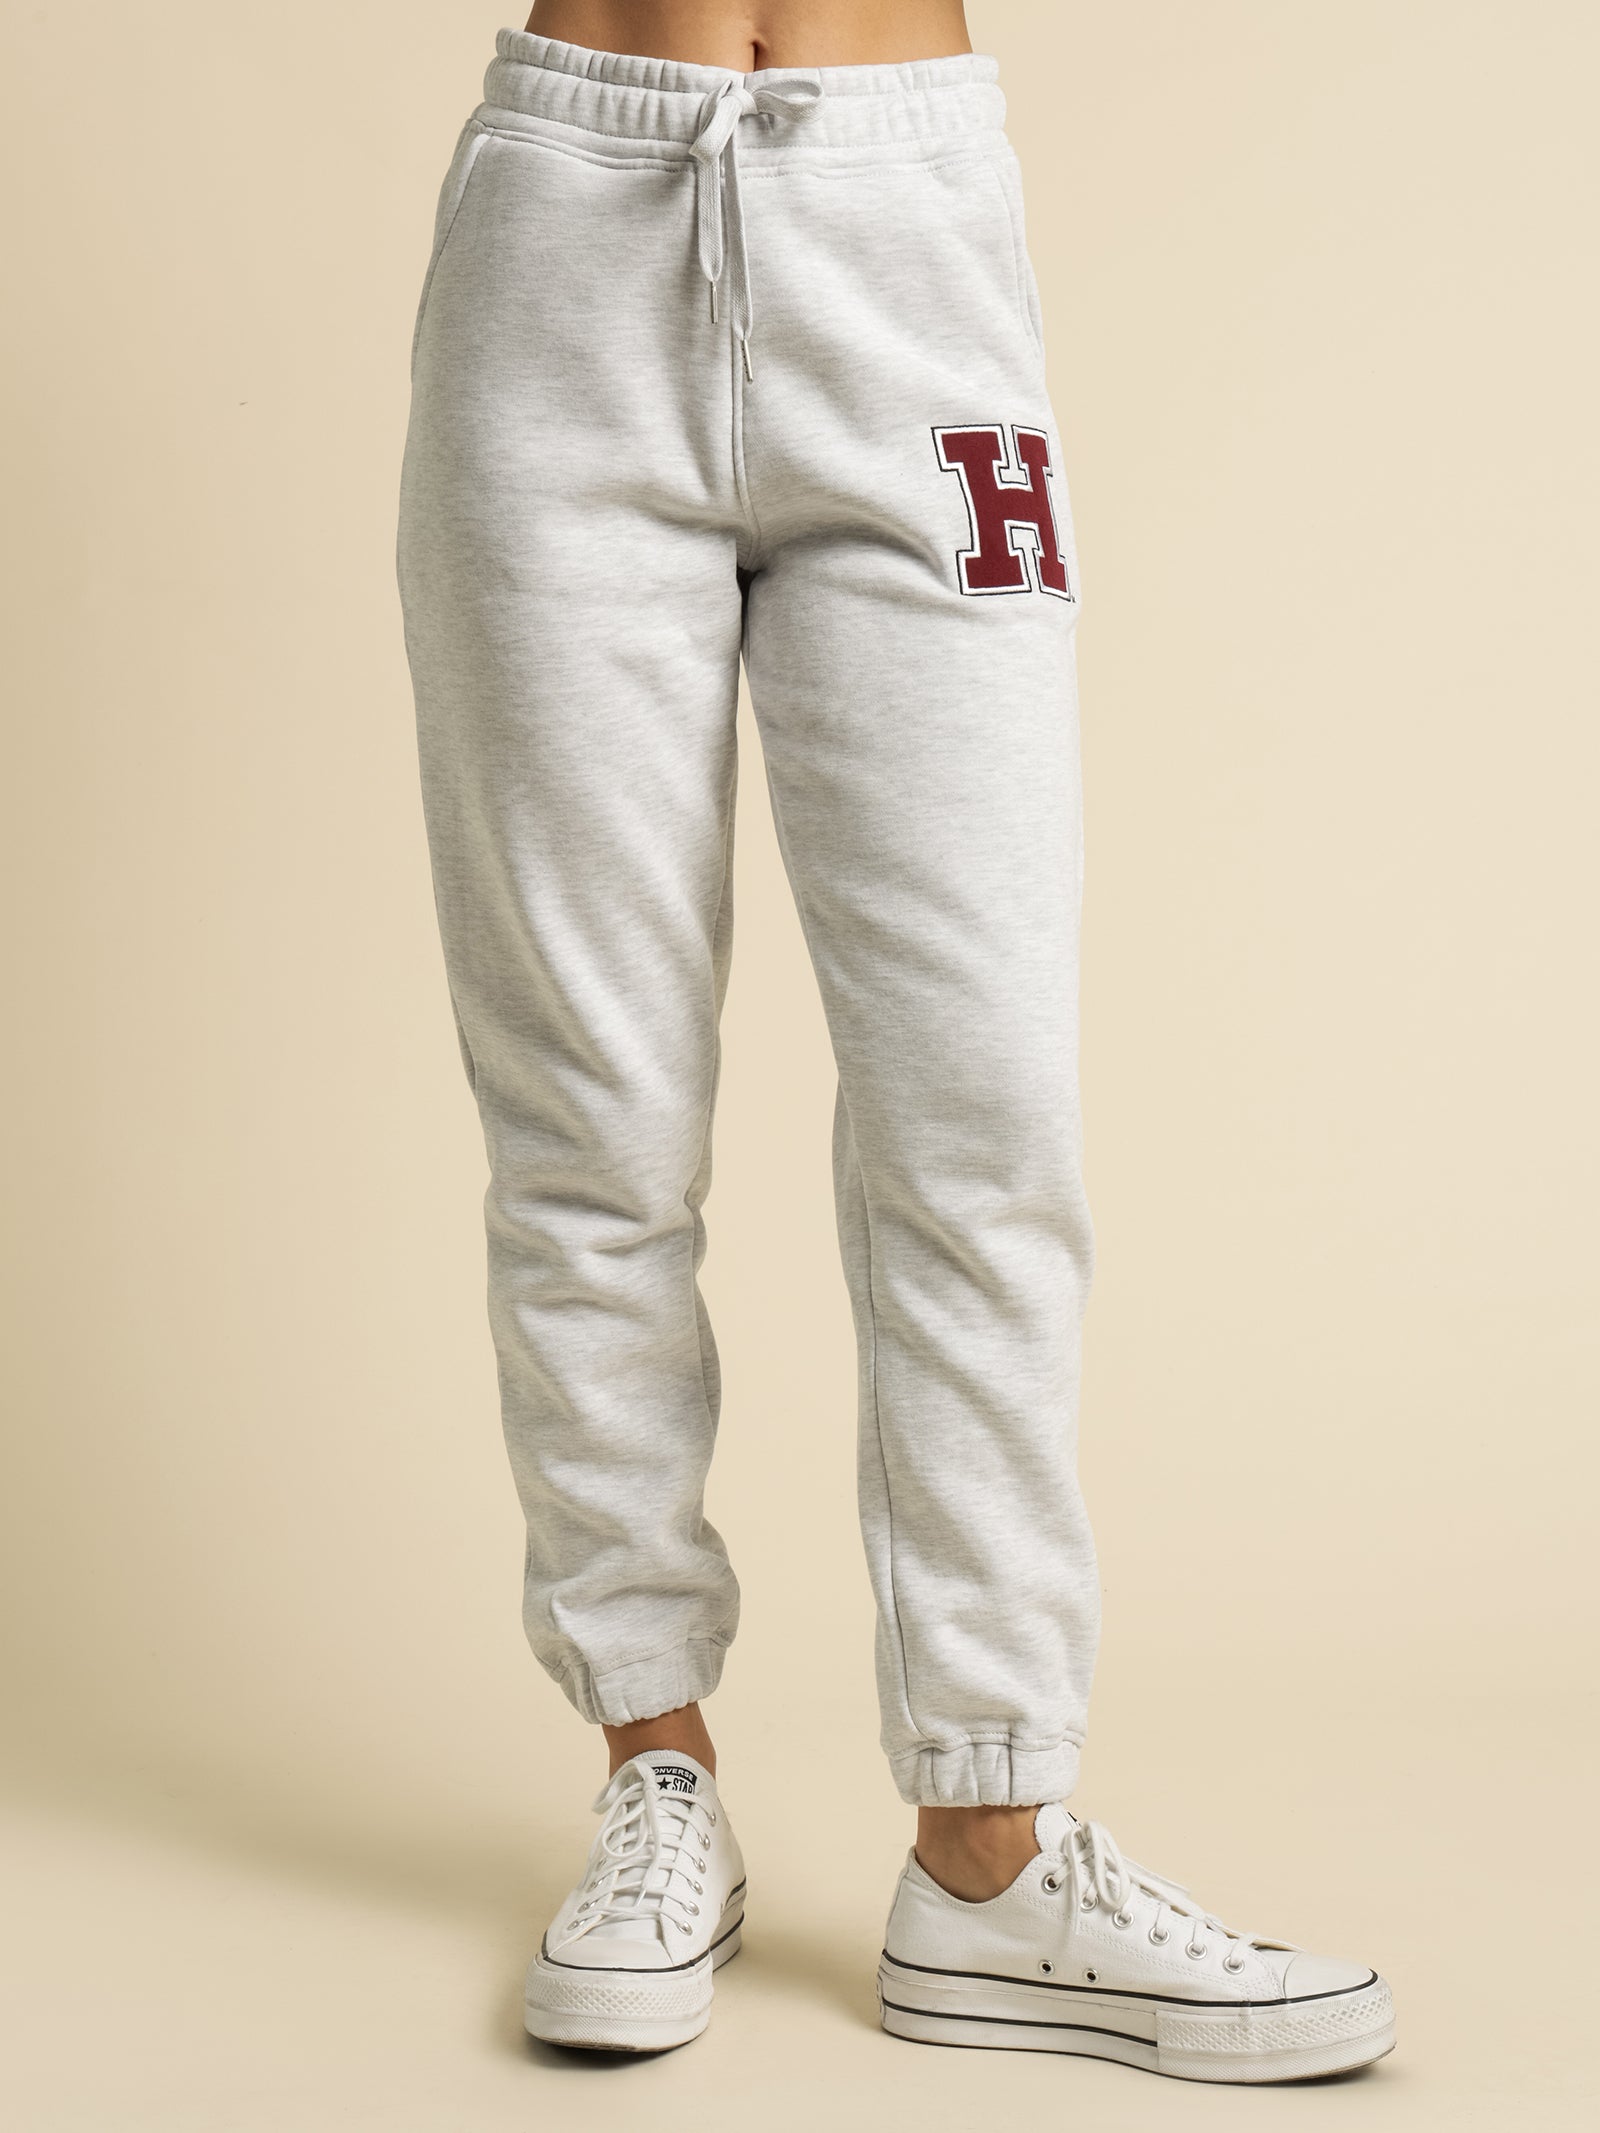 Buy HARVARD Trousers online - Men - 86 products | FASHIOLA.in